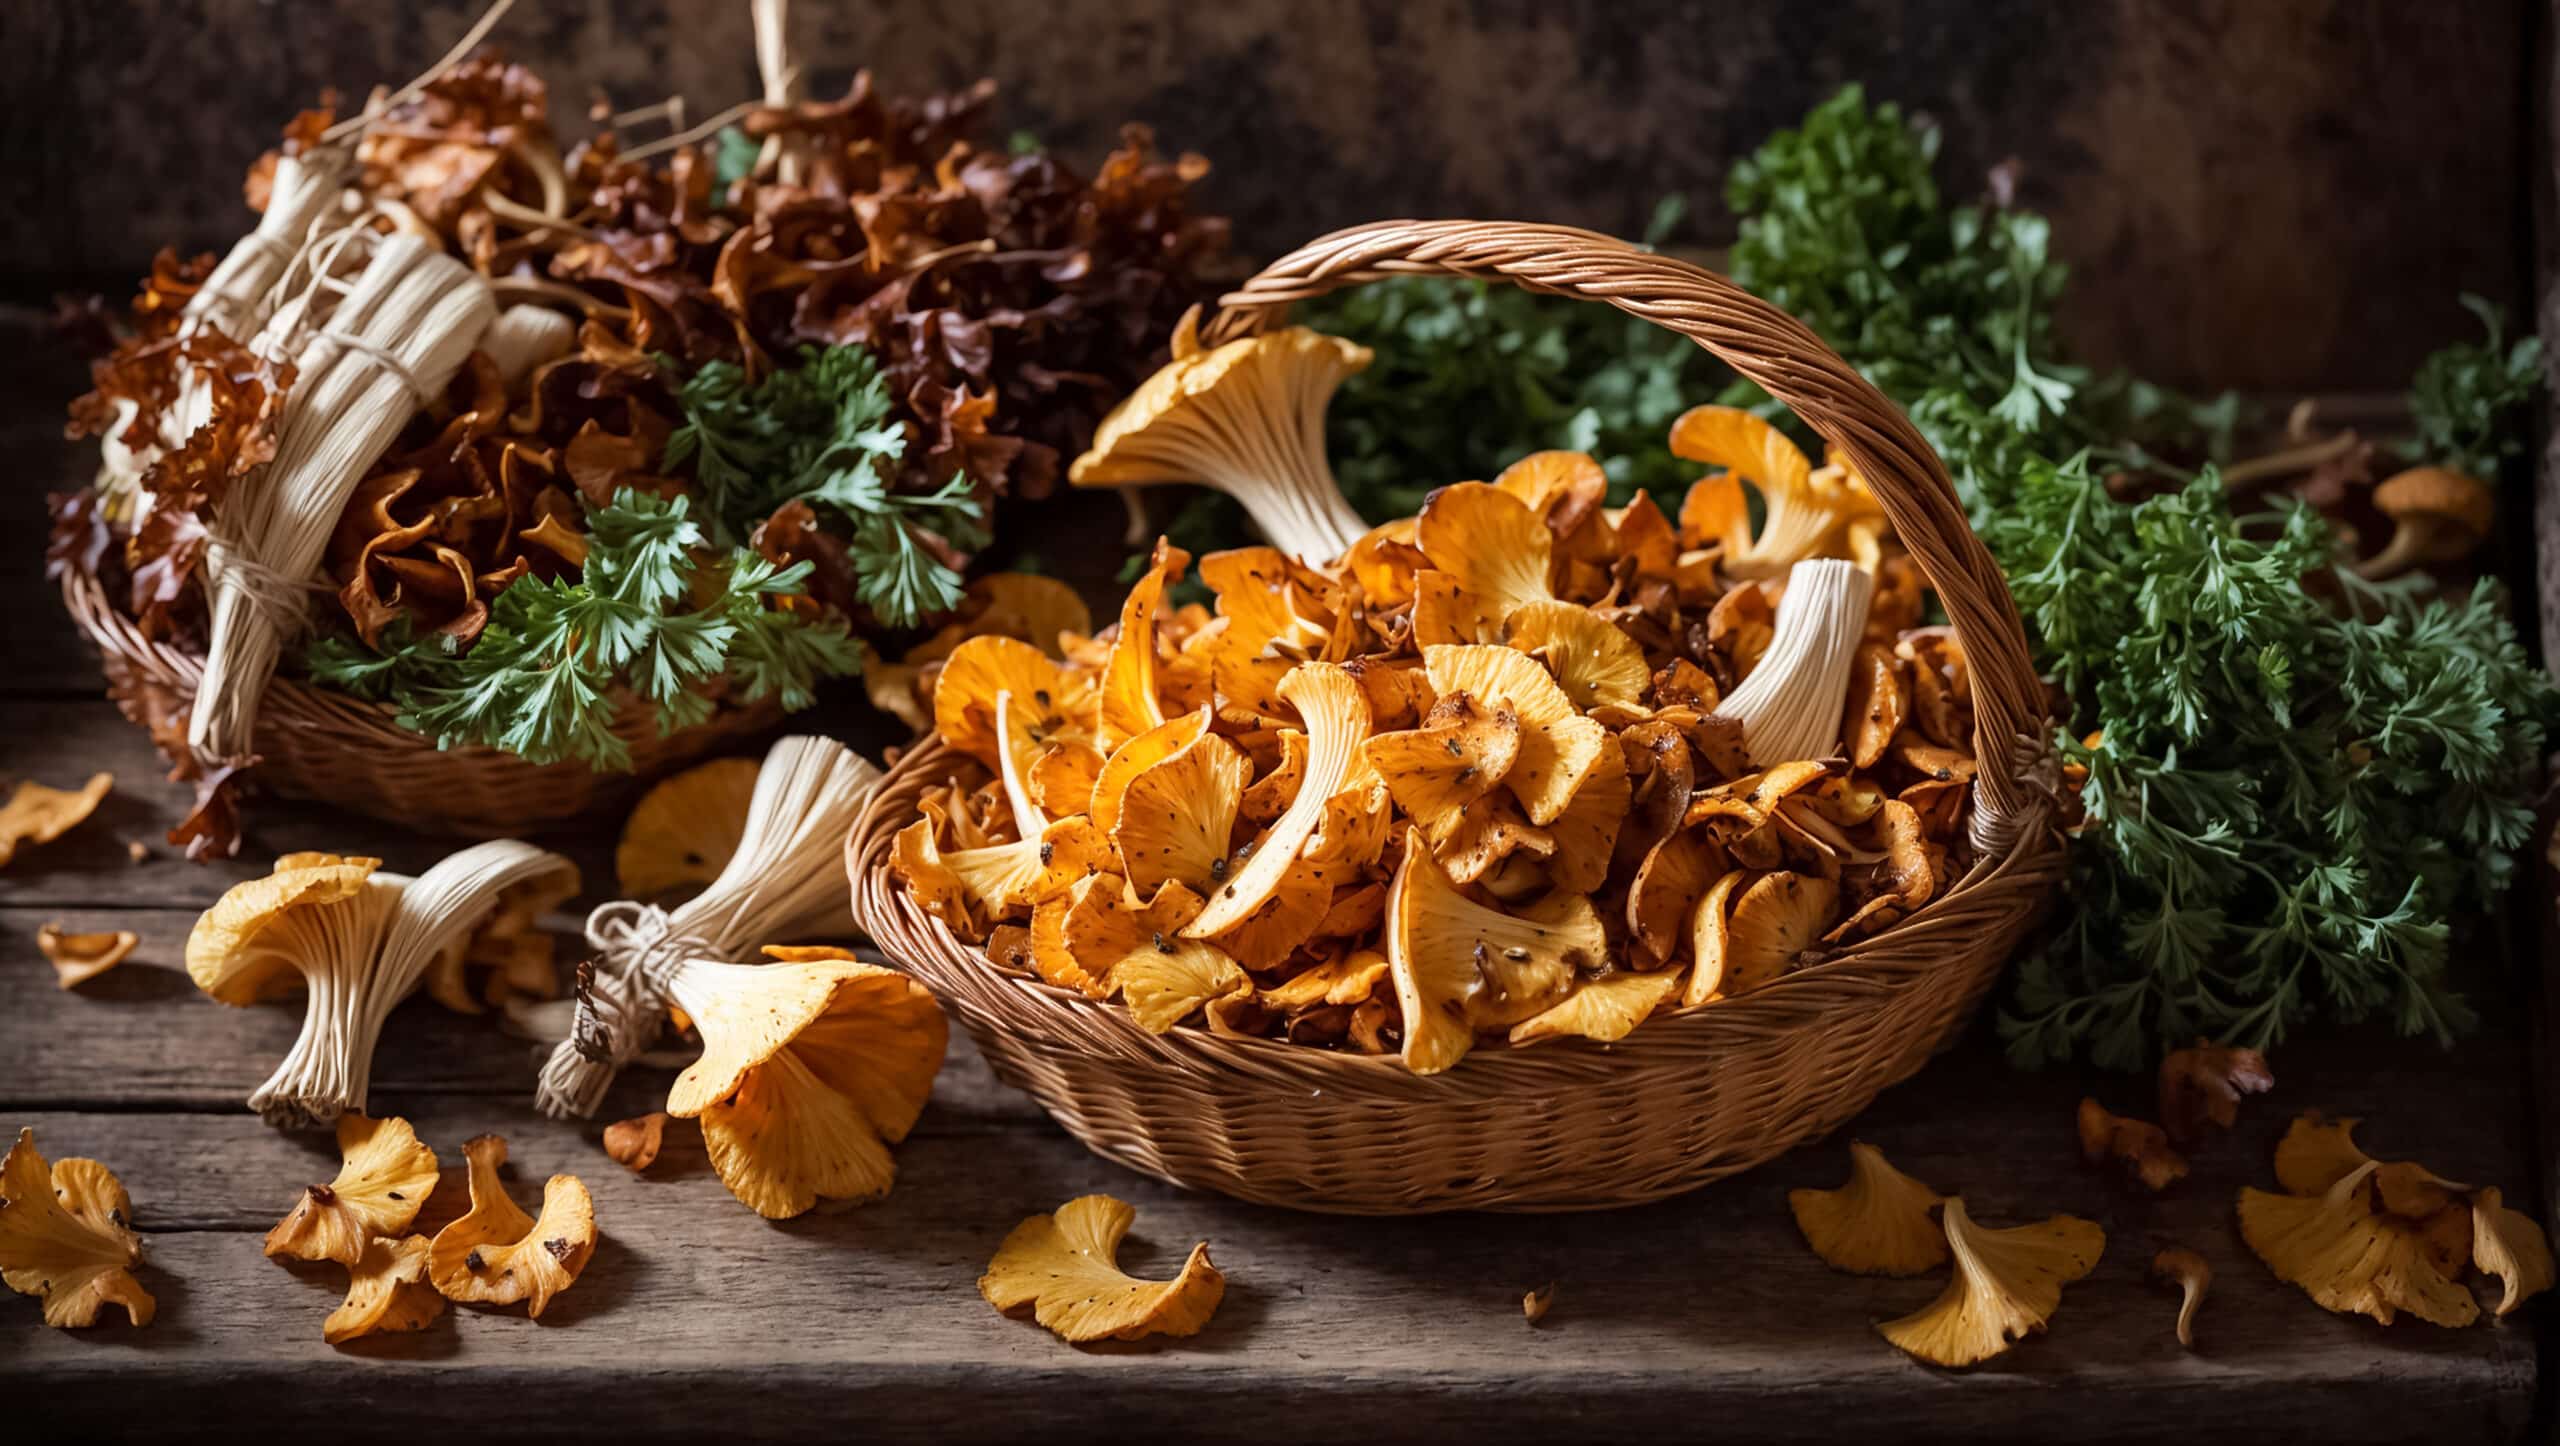 growmyownhealthfood.com : Where is the best place to find chicken of the woods?